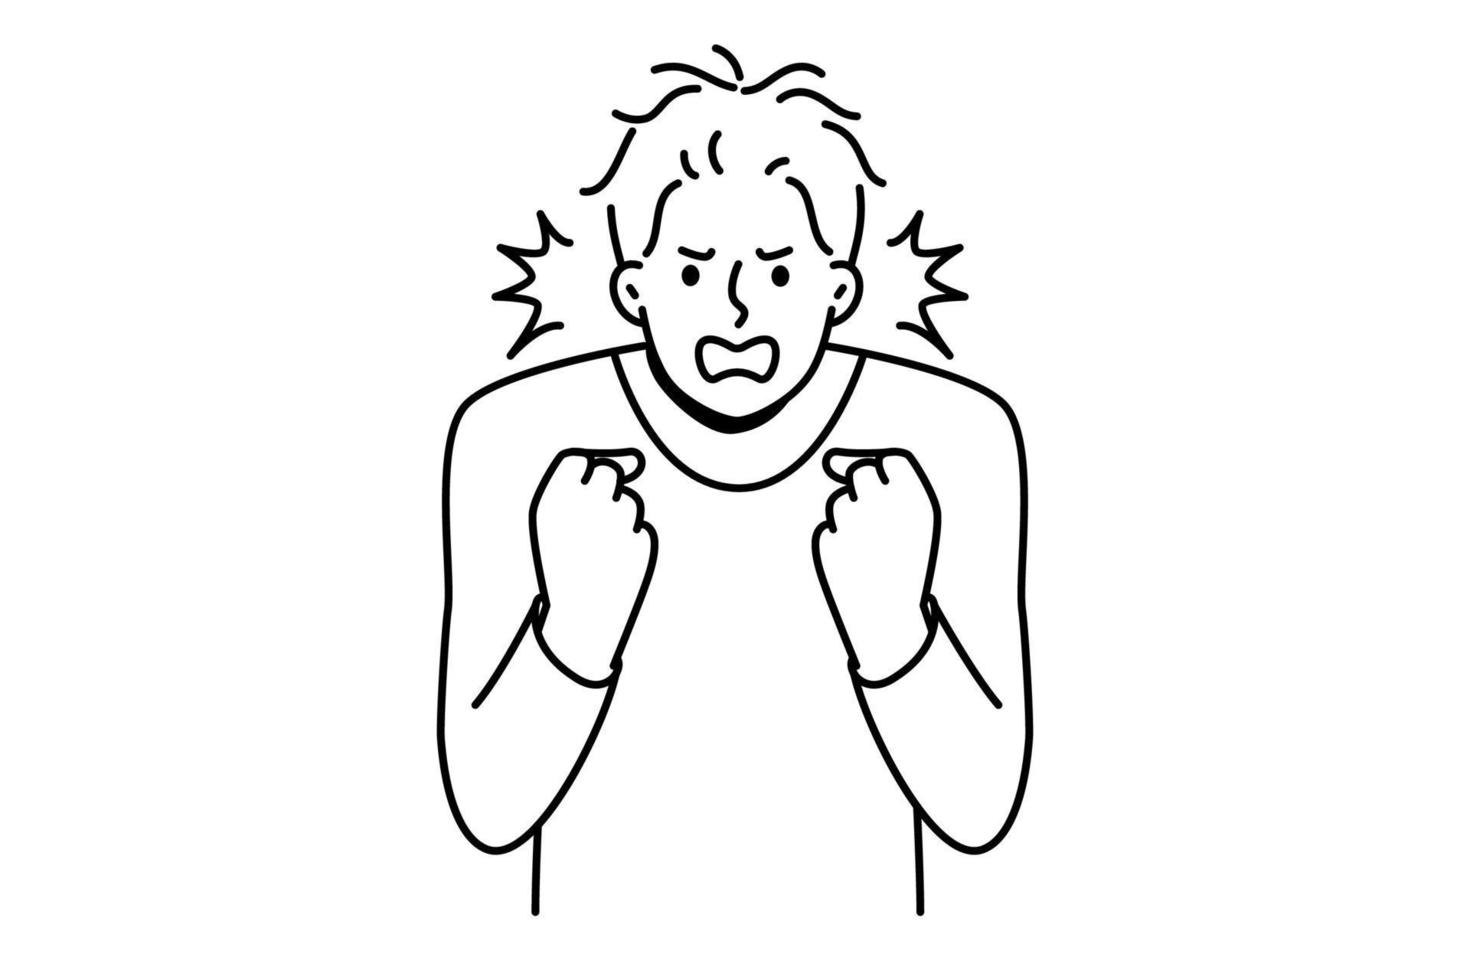 Furious young man clench fists struggle with madness or panic. Angry male feeling emotional and enraged. Rage and emotion control. Vector illustration.